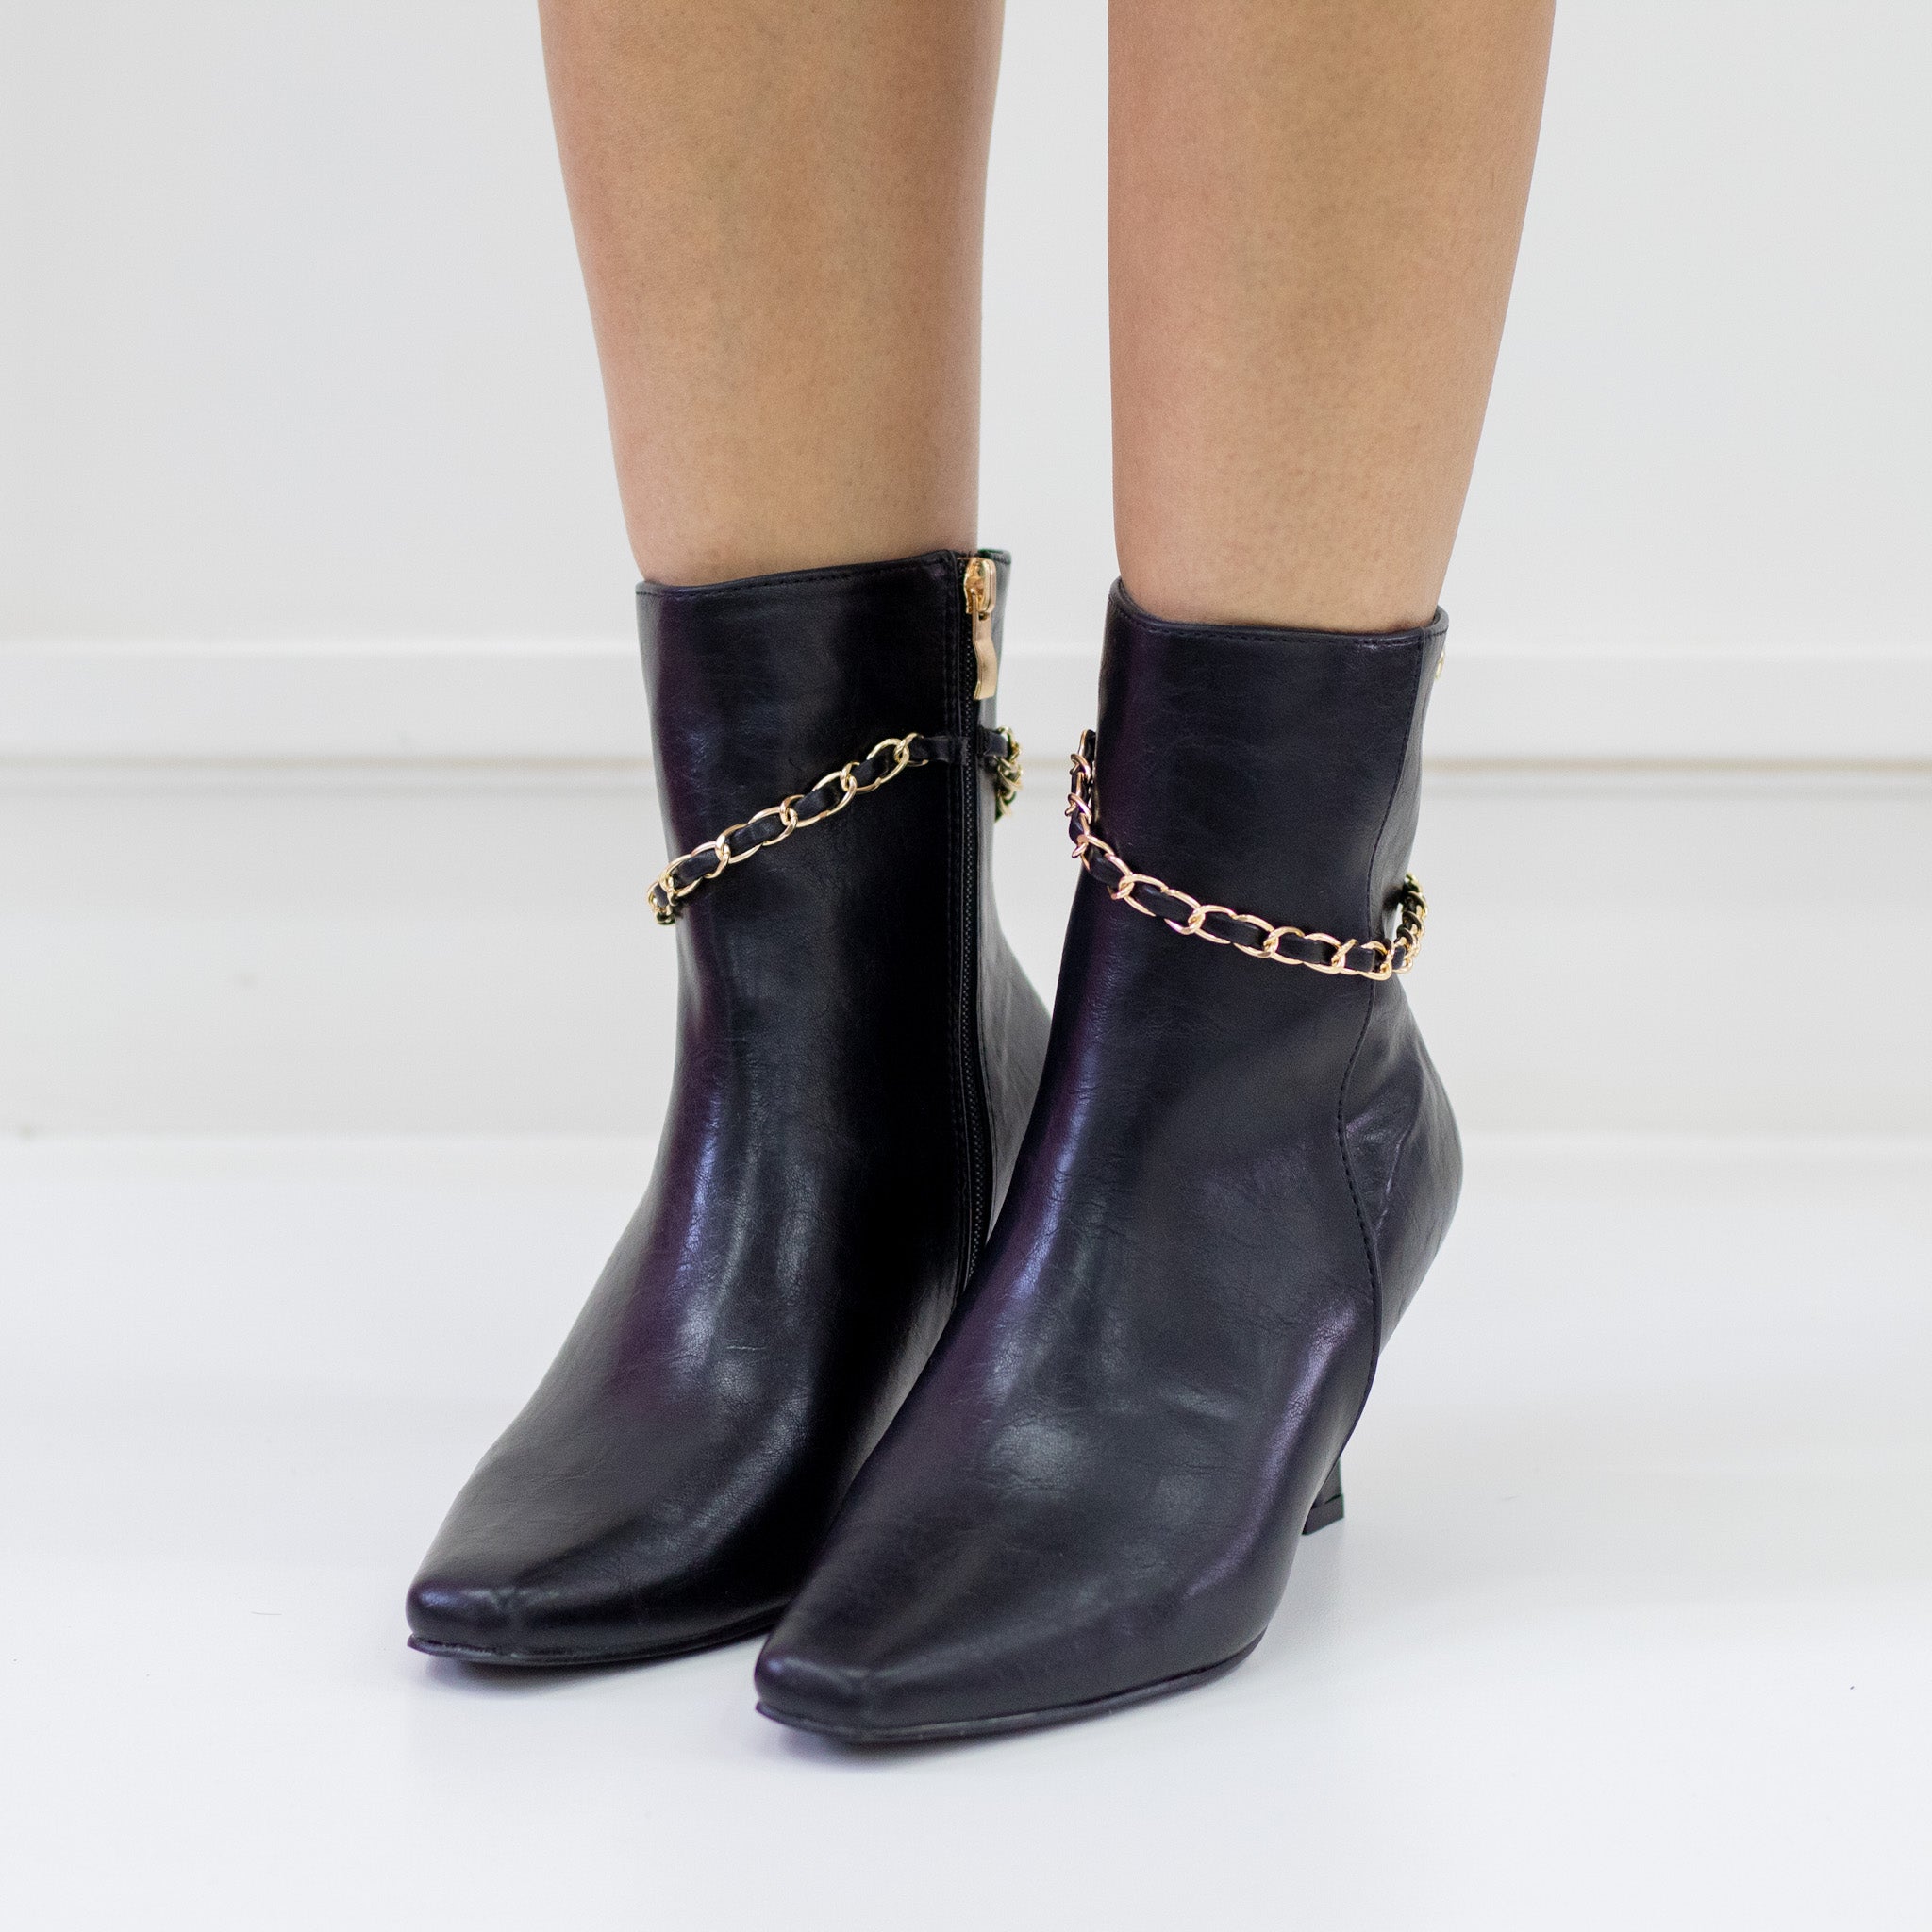 Preview 7cm heel faux leather pu ankle boot black